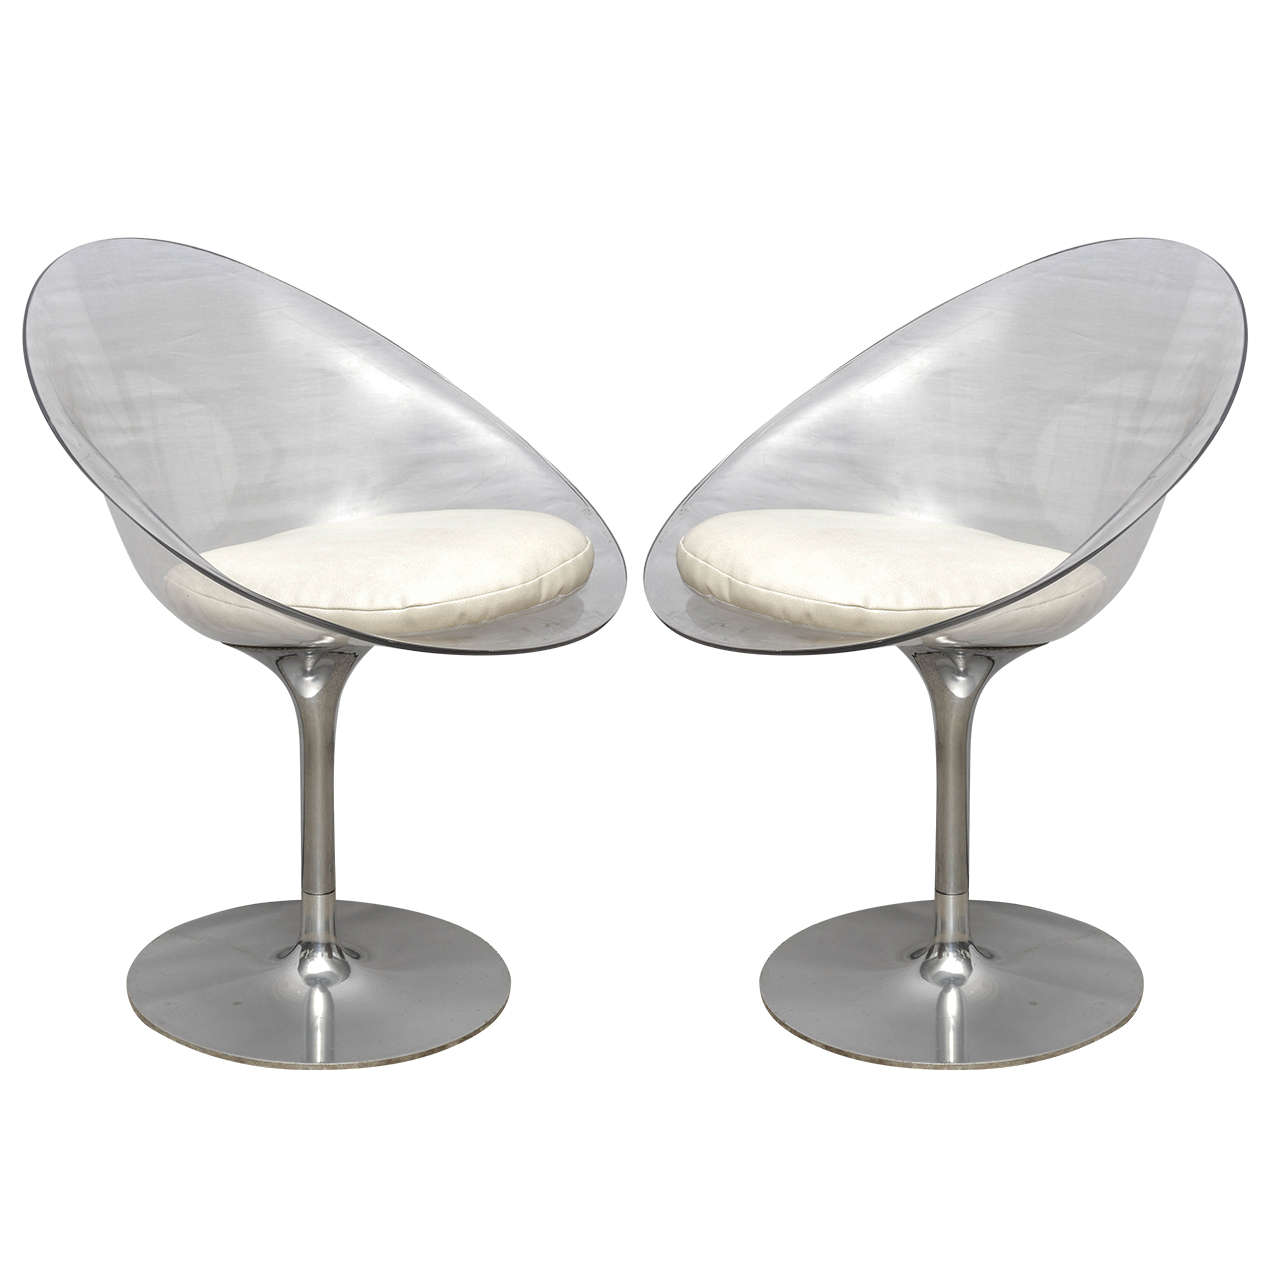 Philippe Starck for Kartell lucite-and-chrome Eros swivel chairs, 2001